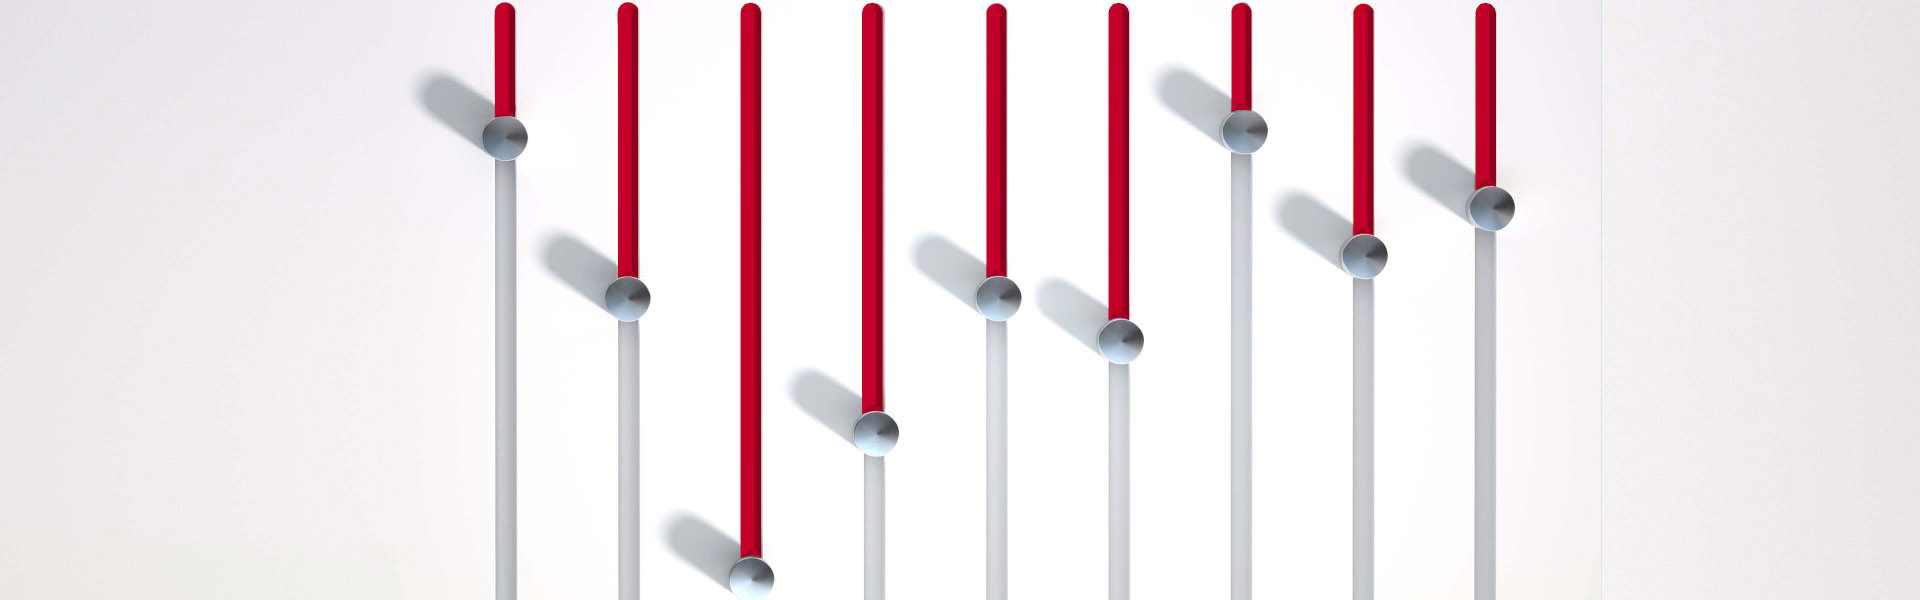 Abstract vertical bar chart made out of red vertical bars on white background.